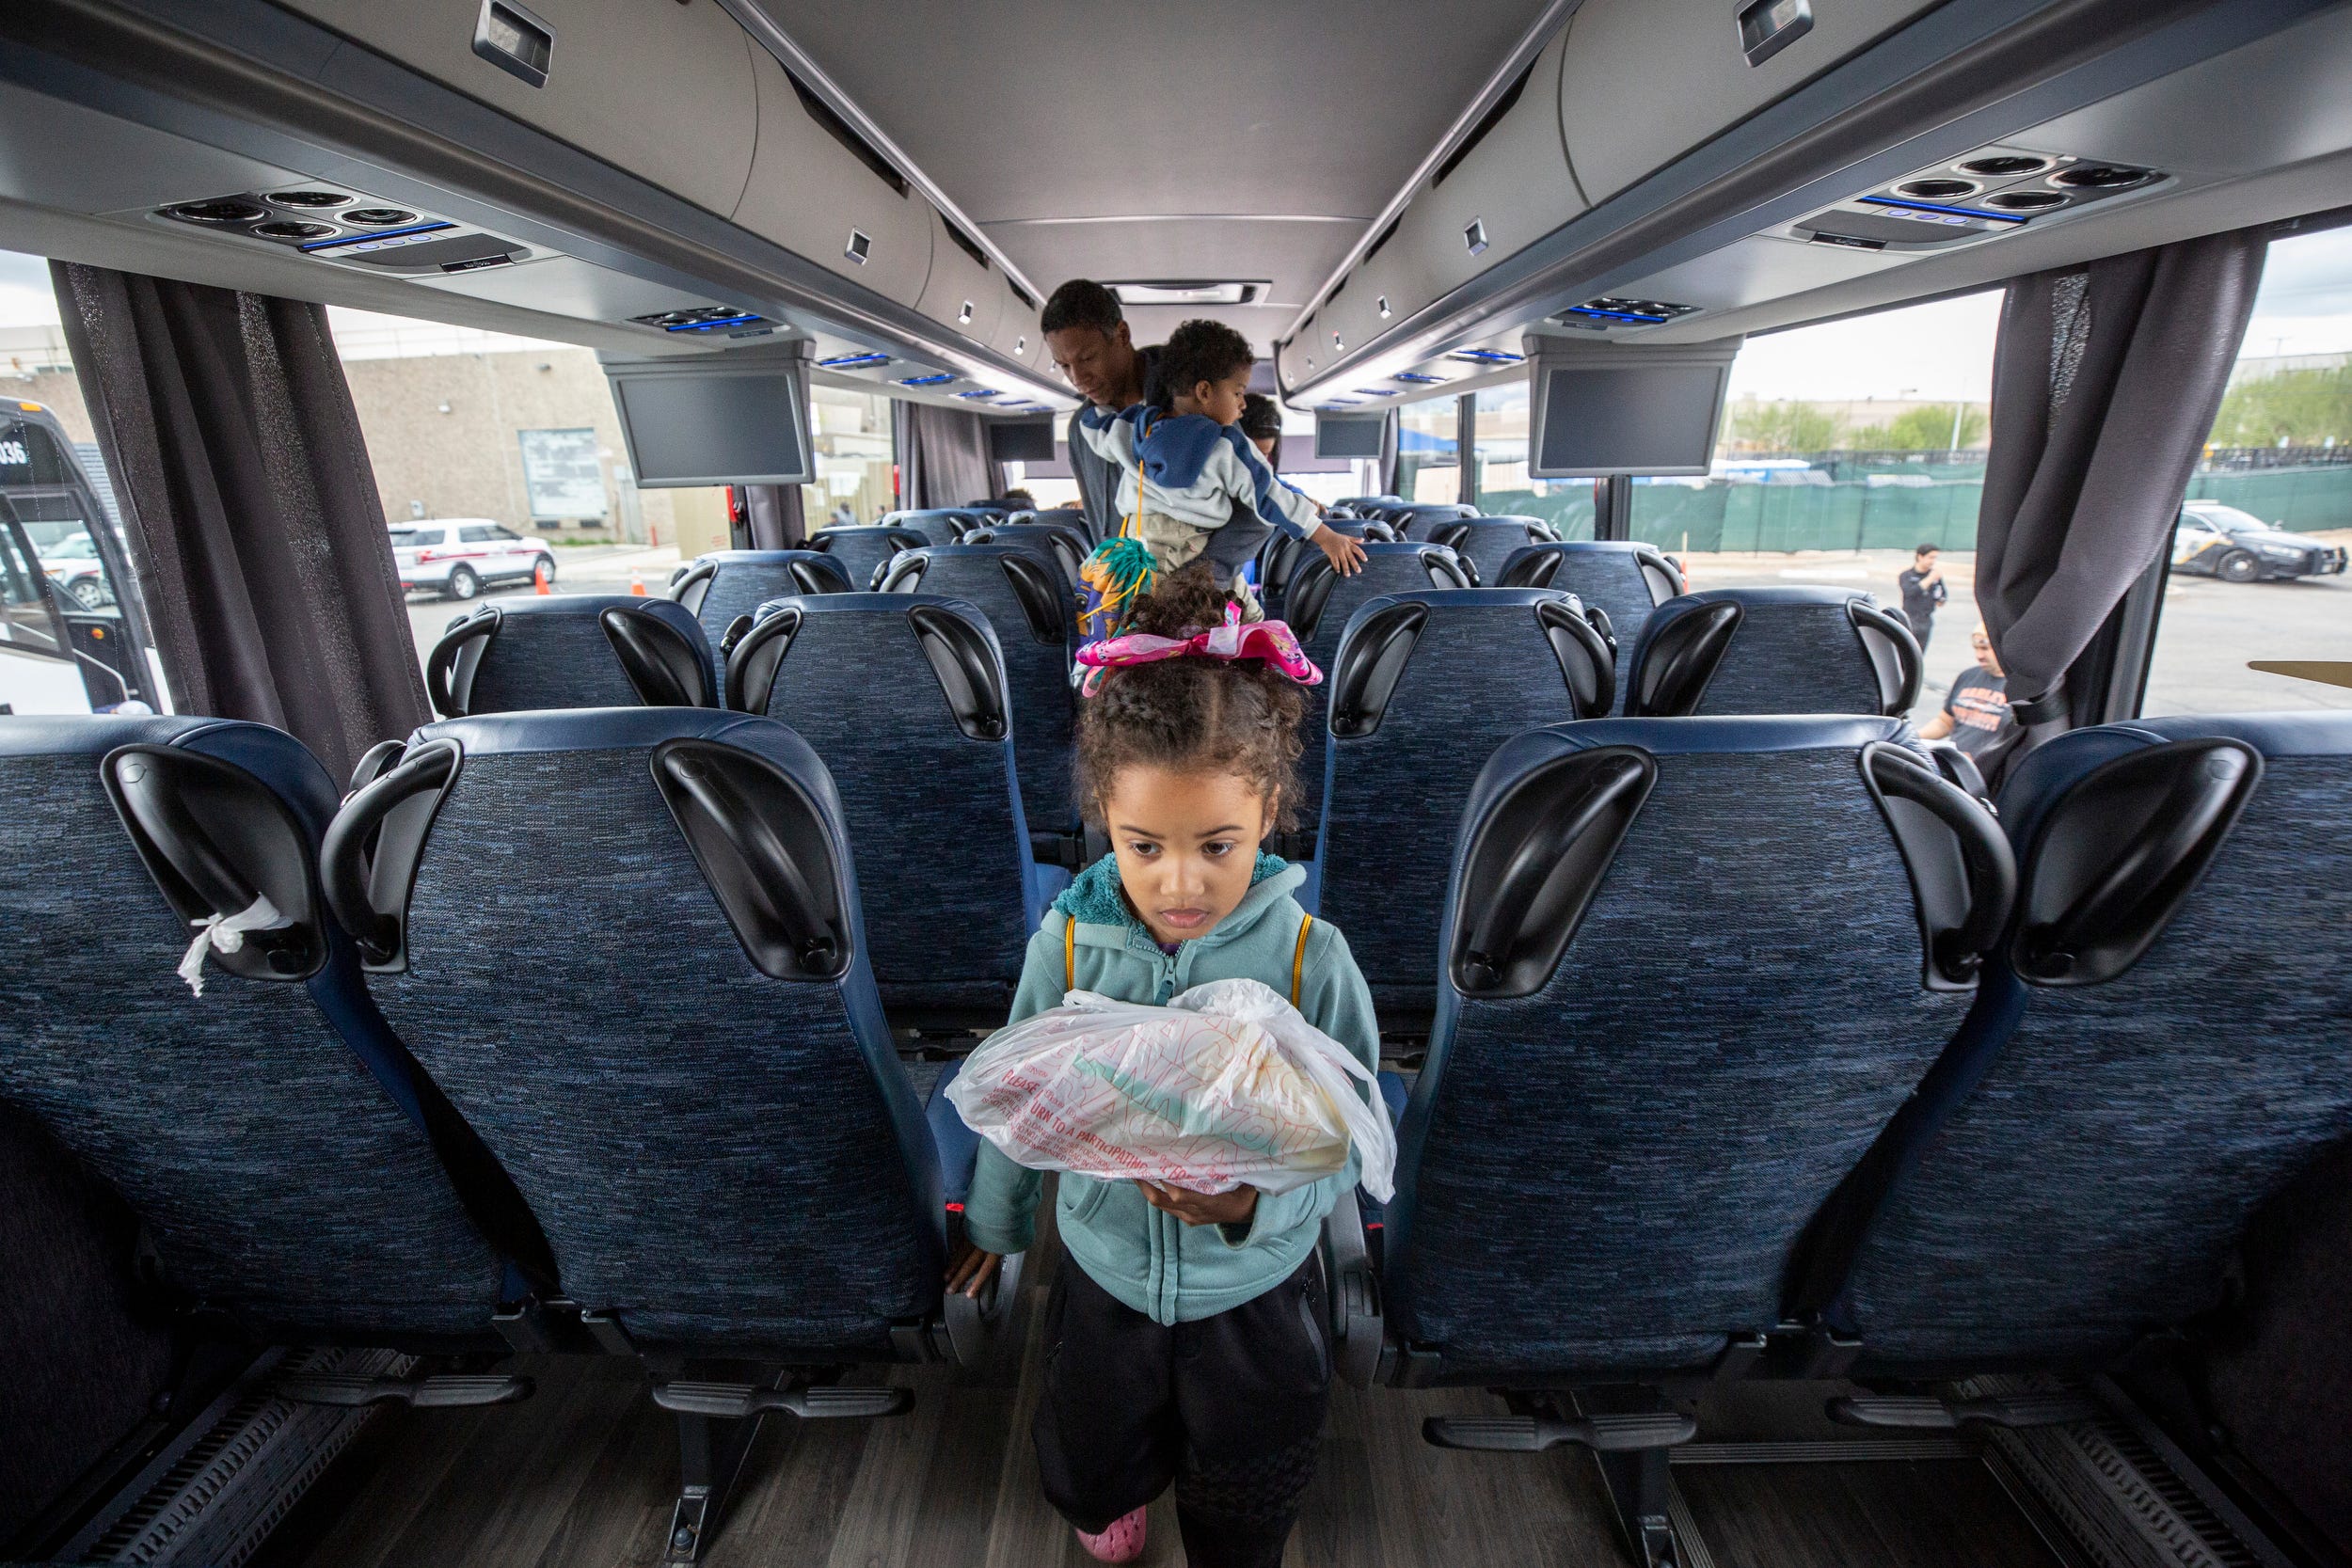 Five-year-old Brittany, the daughter of Kristian Gonzalez Perez and Katiuska Carolina Leal Moreno, boards a bus headed to New York City from the Migrant Welcome Center in El Paso, Texas.